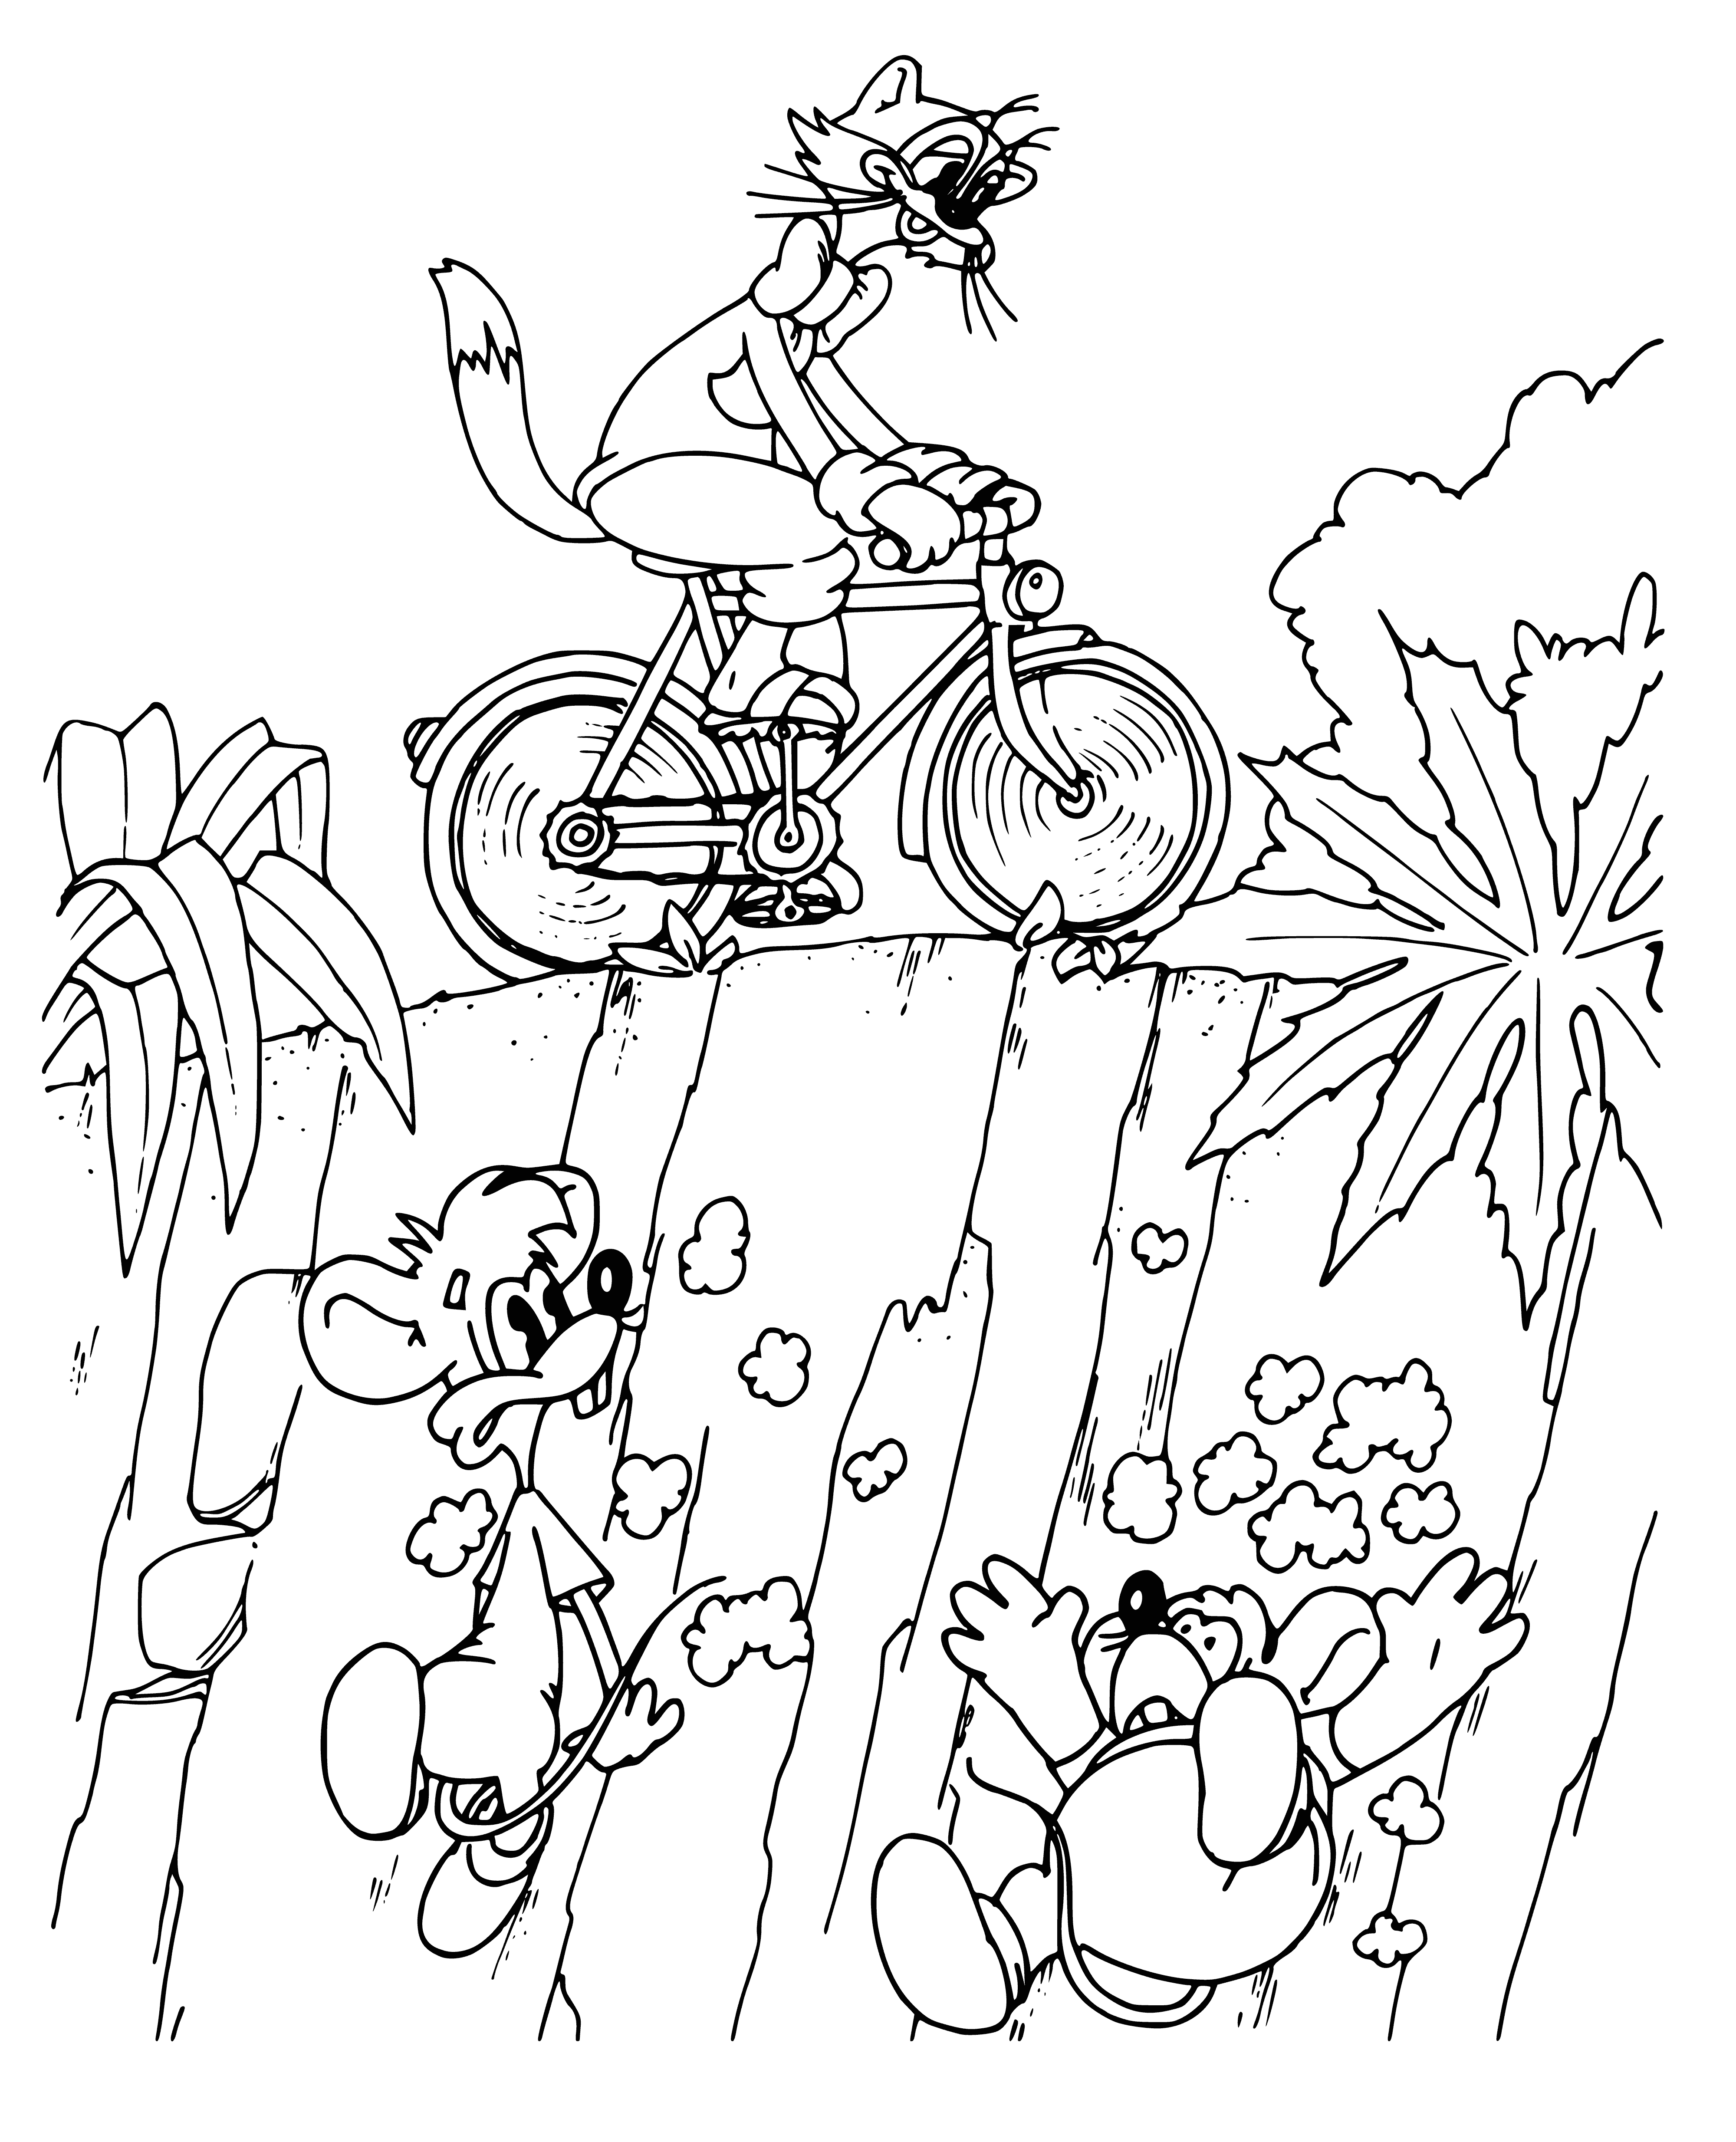 coloring page: Leopold the Cat is biking through the mountains with a map. Ready to explore and have an adventure! #catonthego